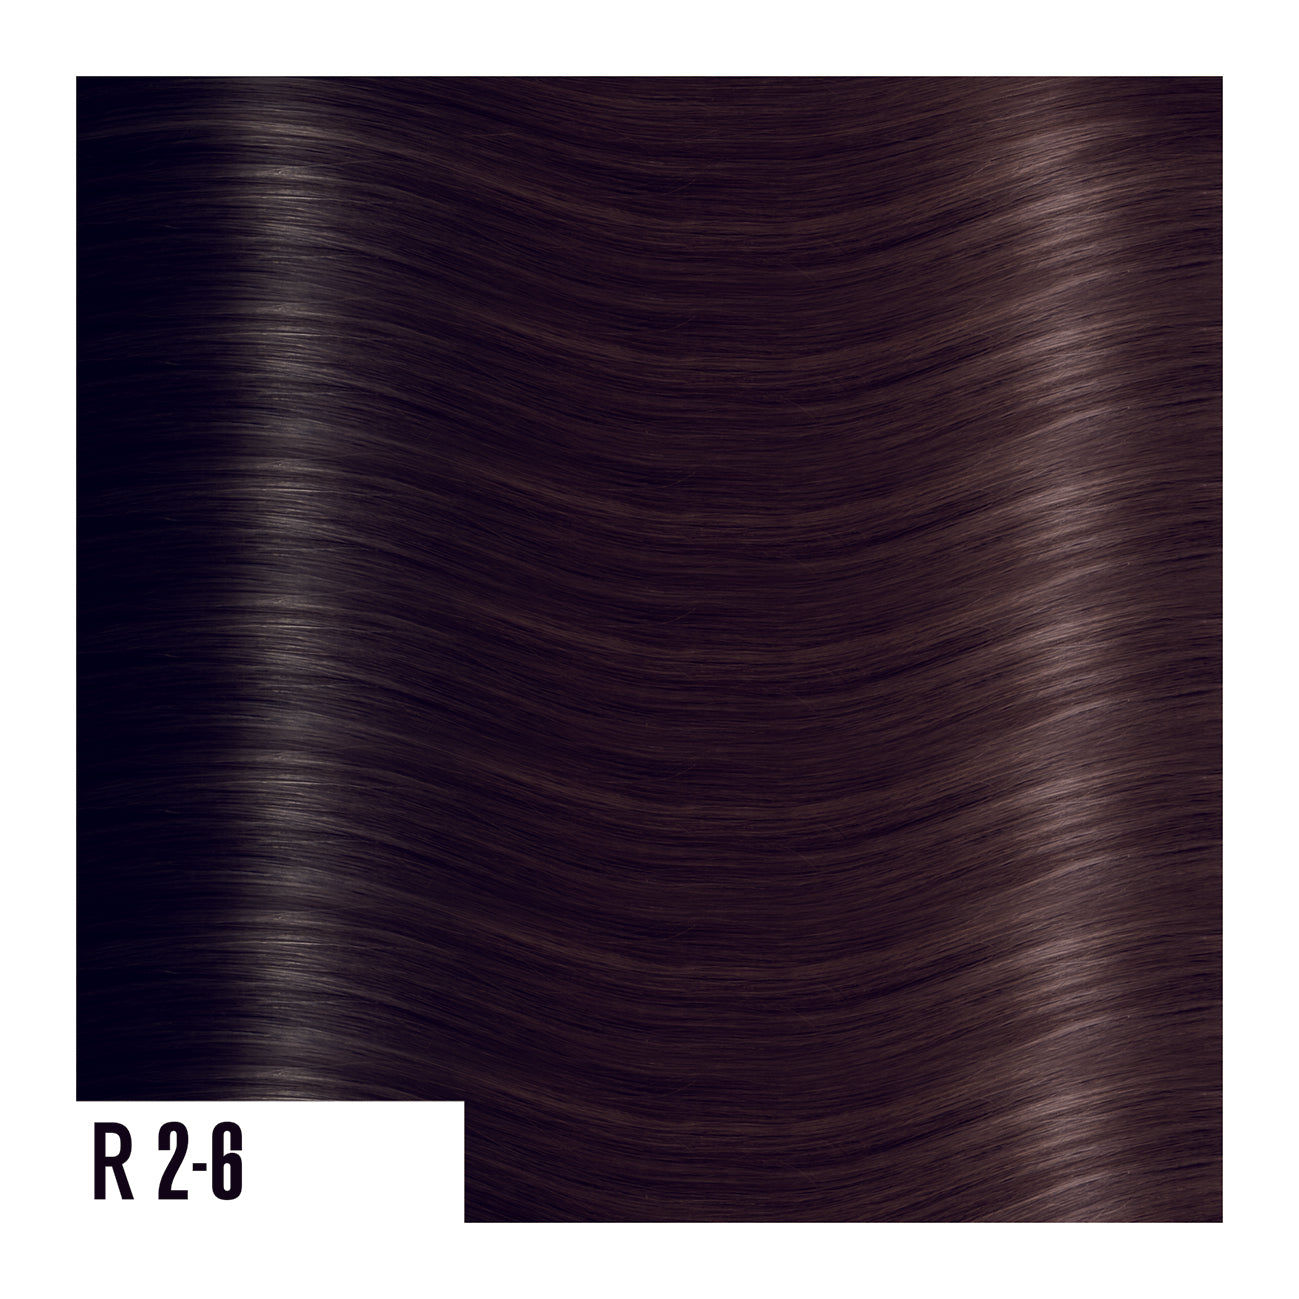 R2-6 - Rooted Prime Tape In Dark Brown/black into brown - Ombre colors are a beautiful gradual blend of 3 colors with darker roots and lighter ends. 